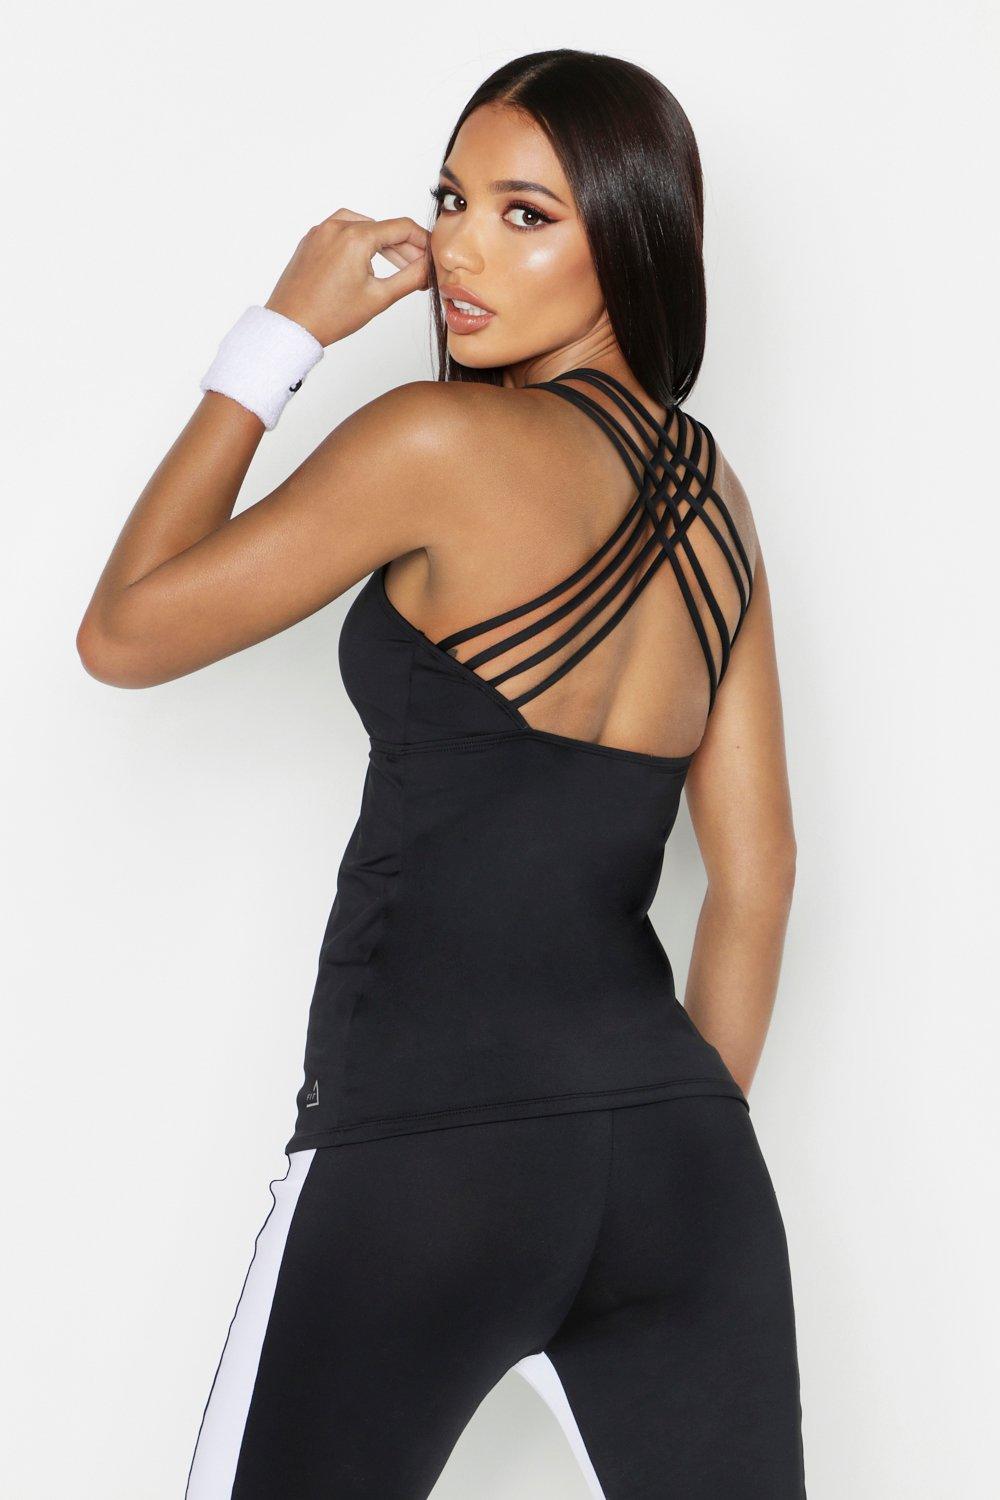 Fit Strappy Back Running Tank Top